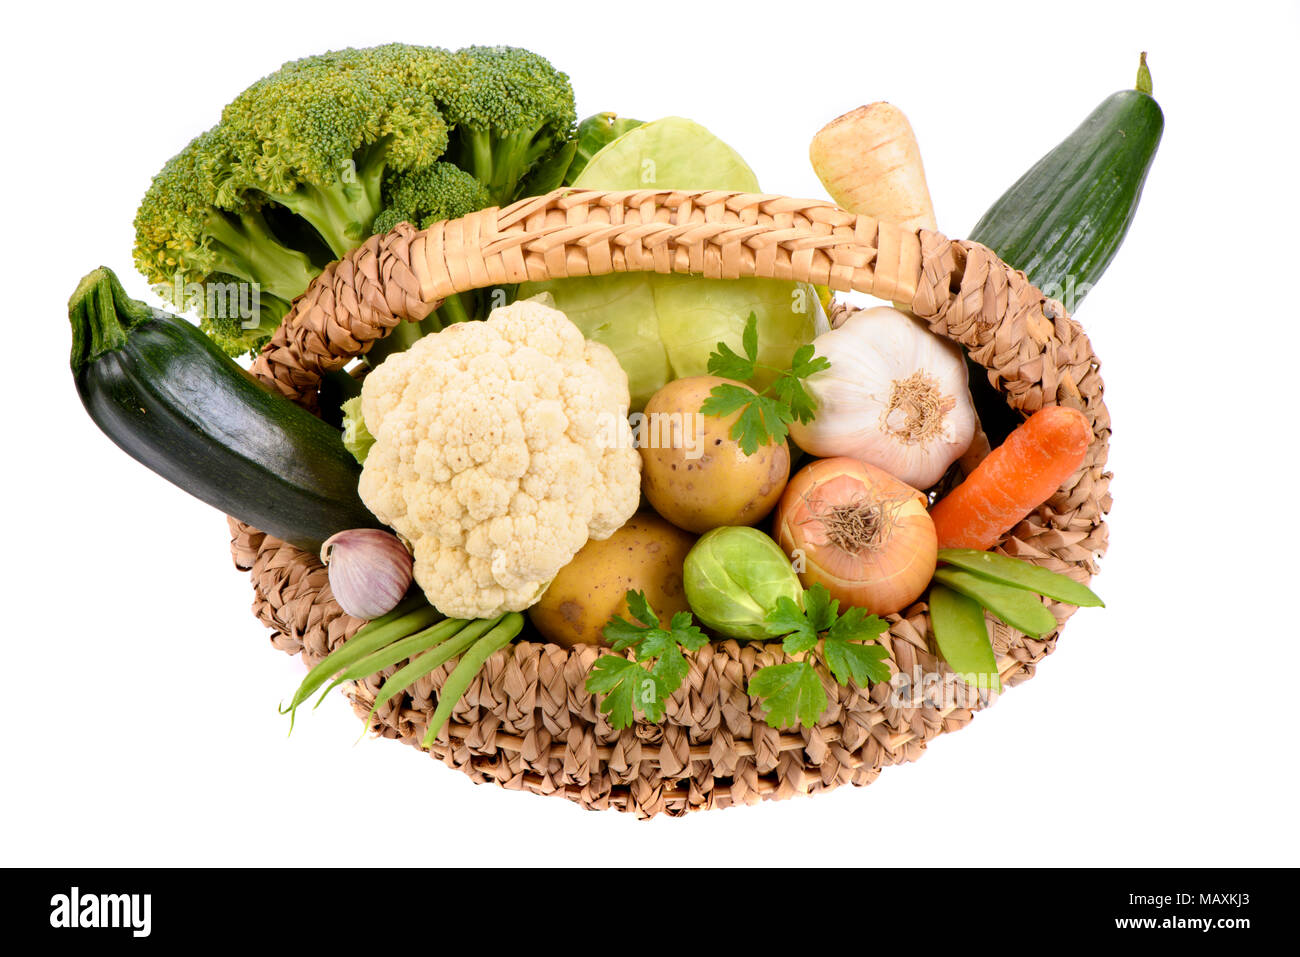 group of fresh vegetables from market Stock Photo